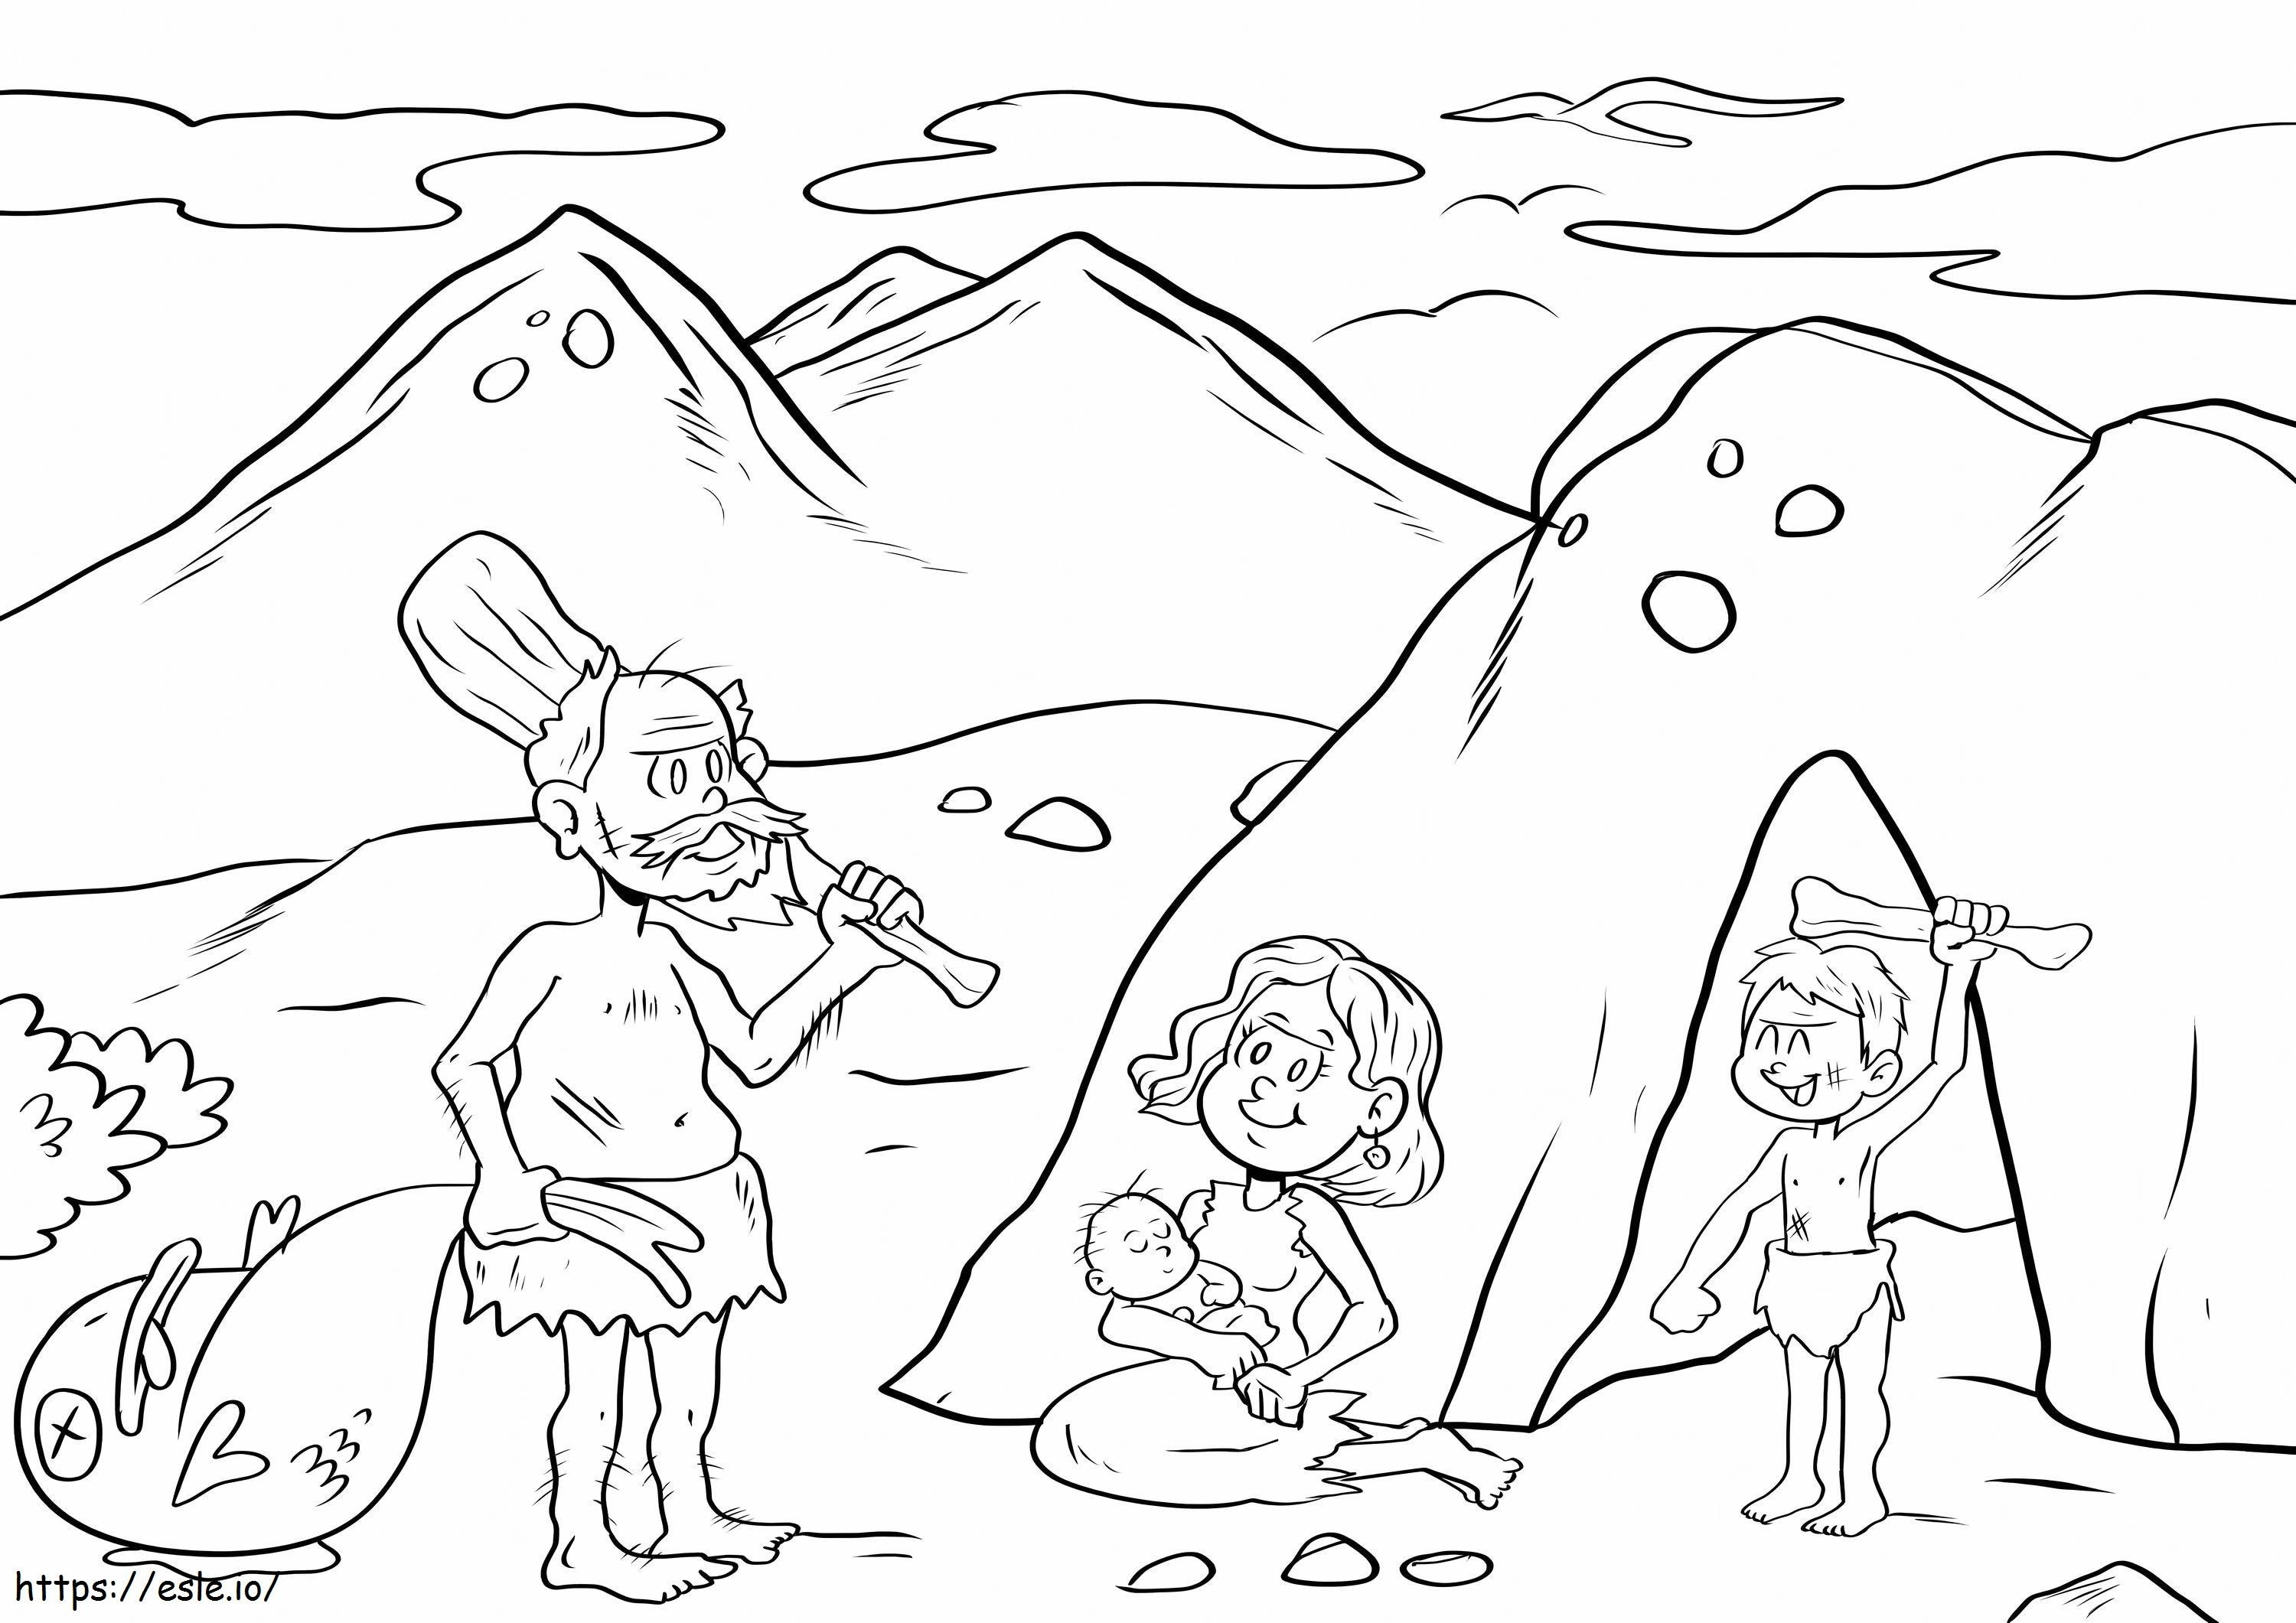 Primitive Family coloring page